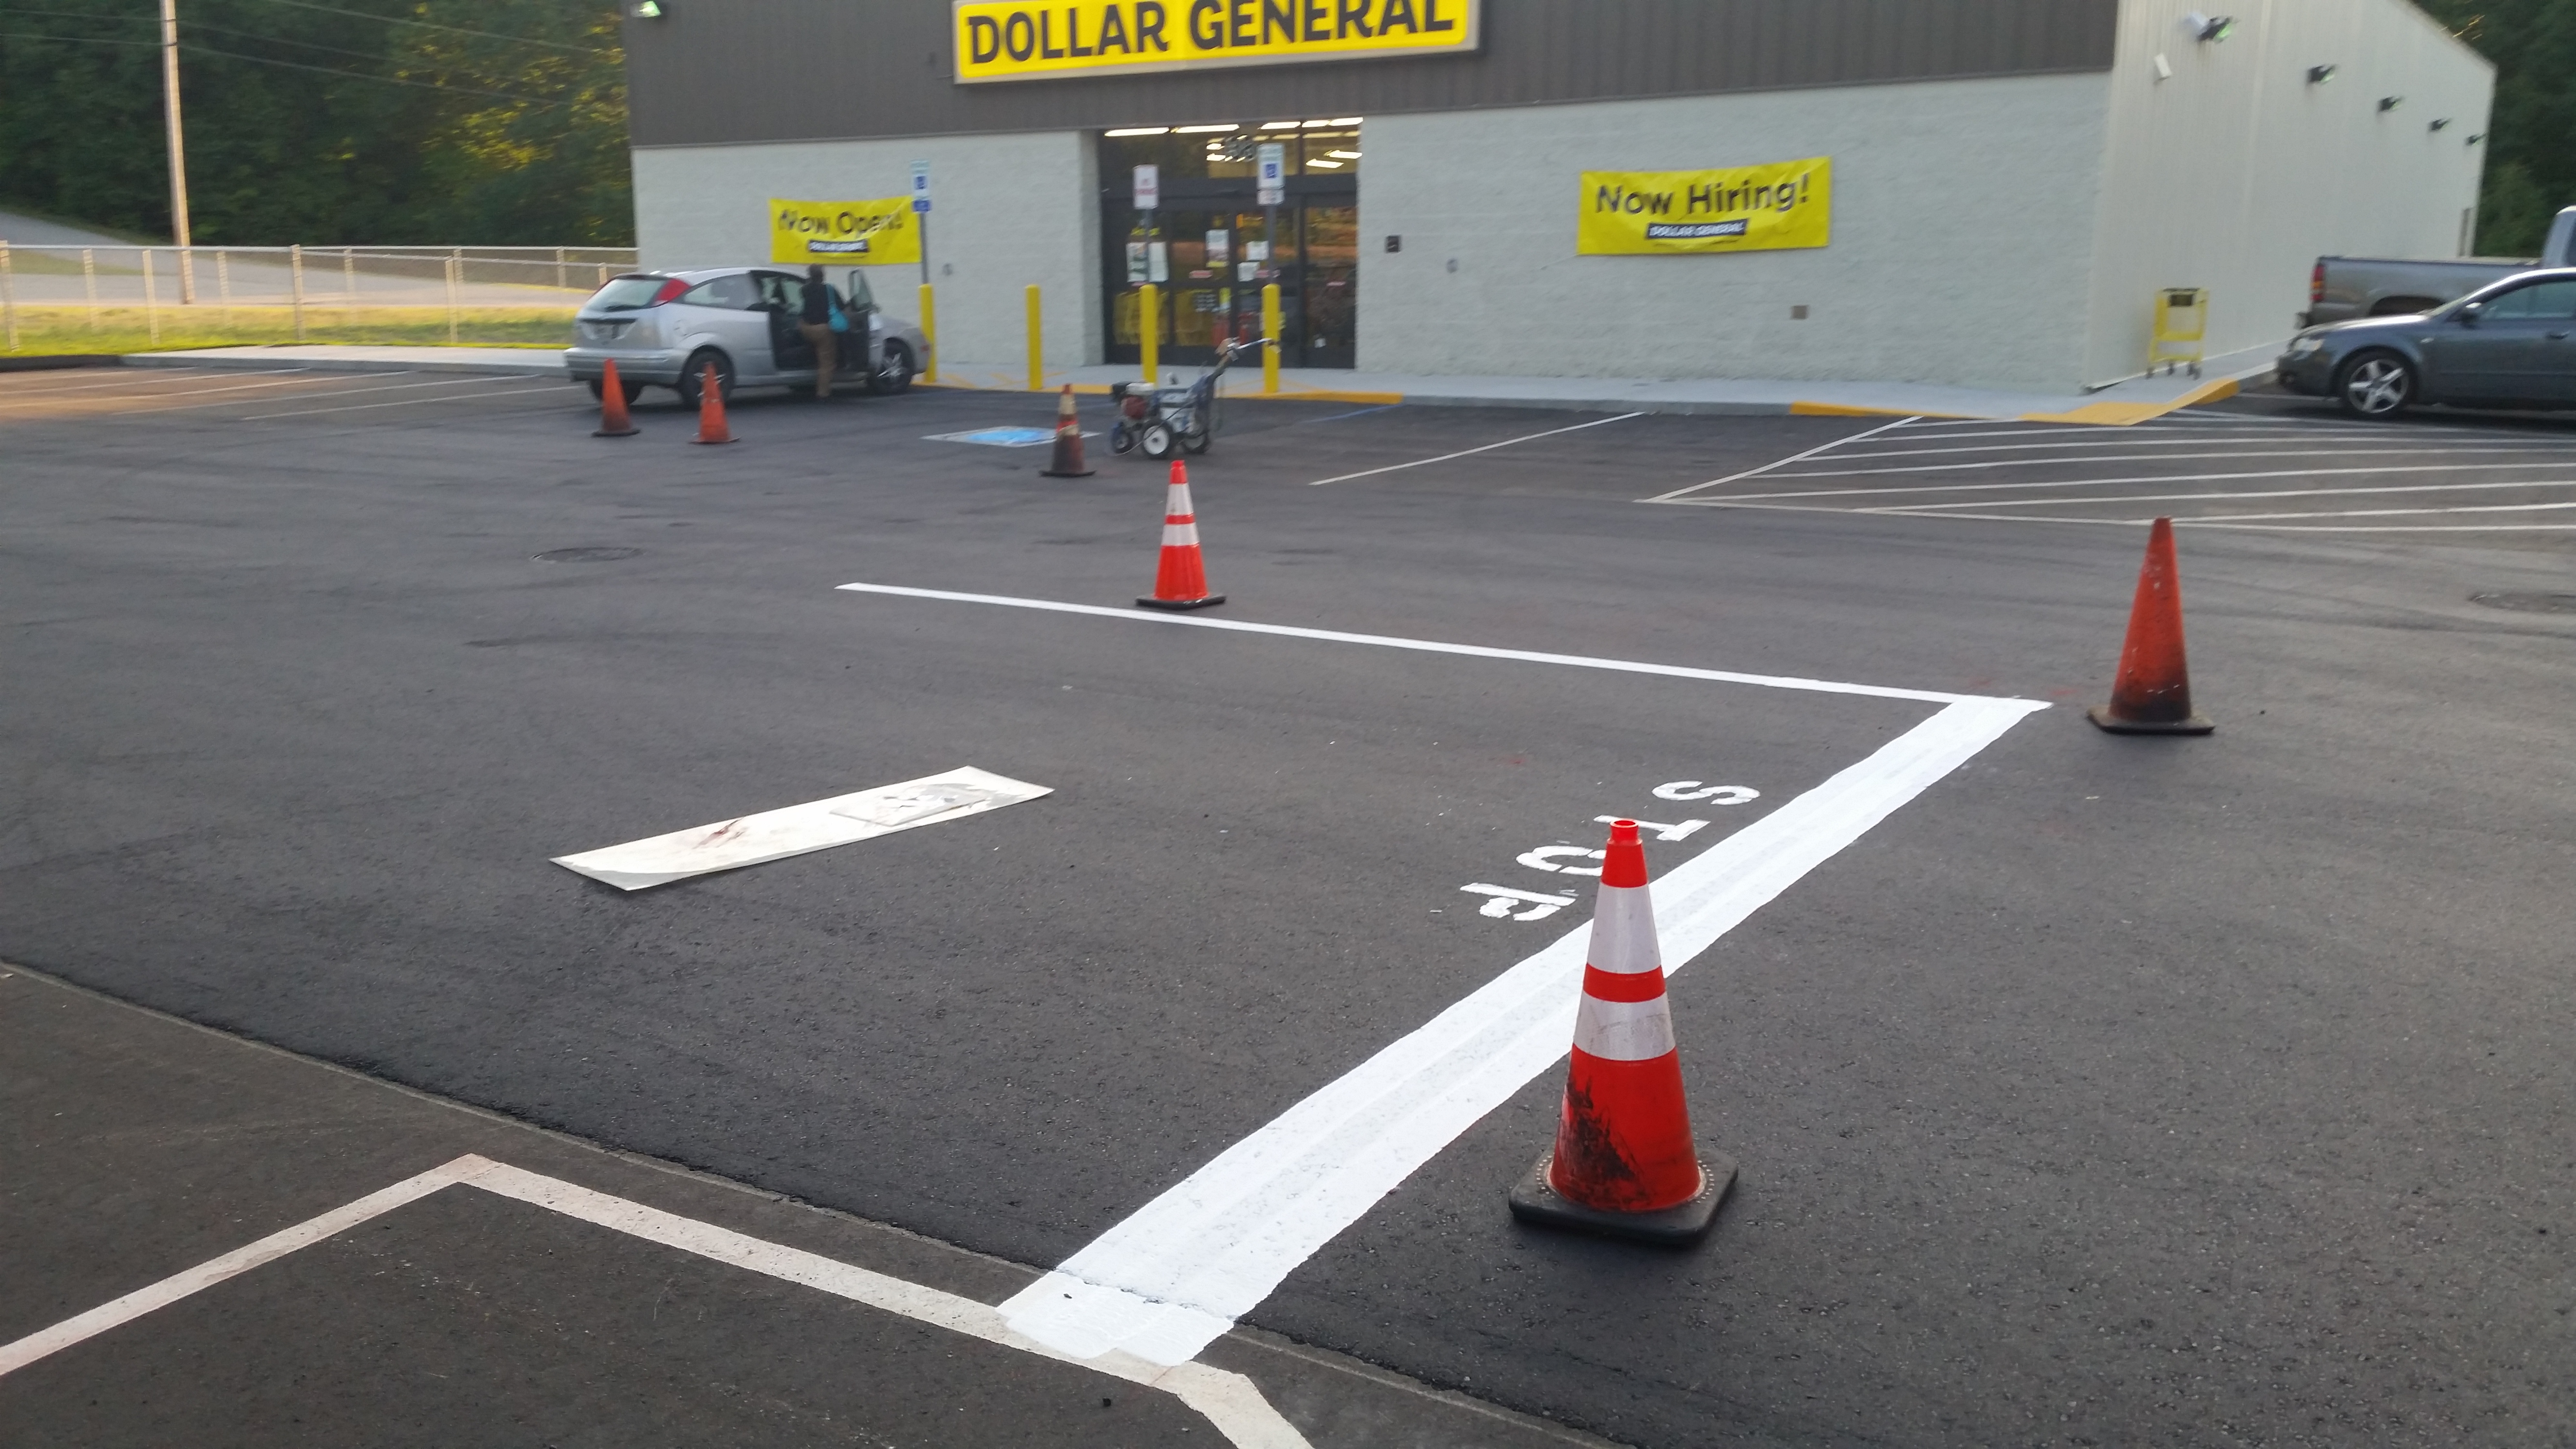 Paving and marking for Dollar General in Limerick, ME.